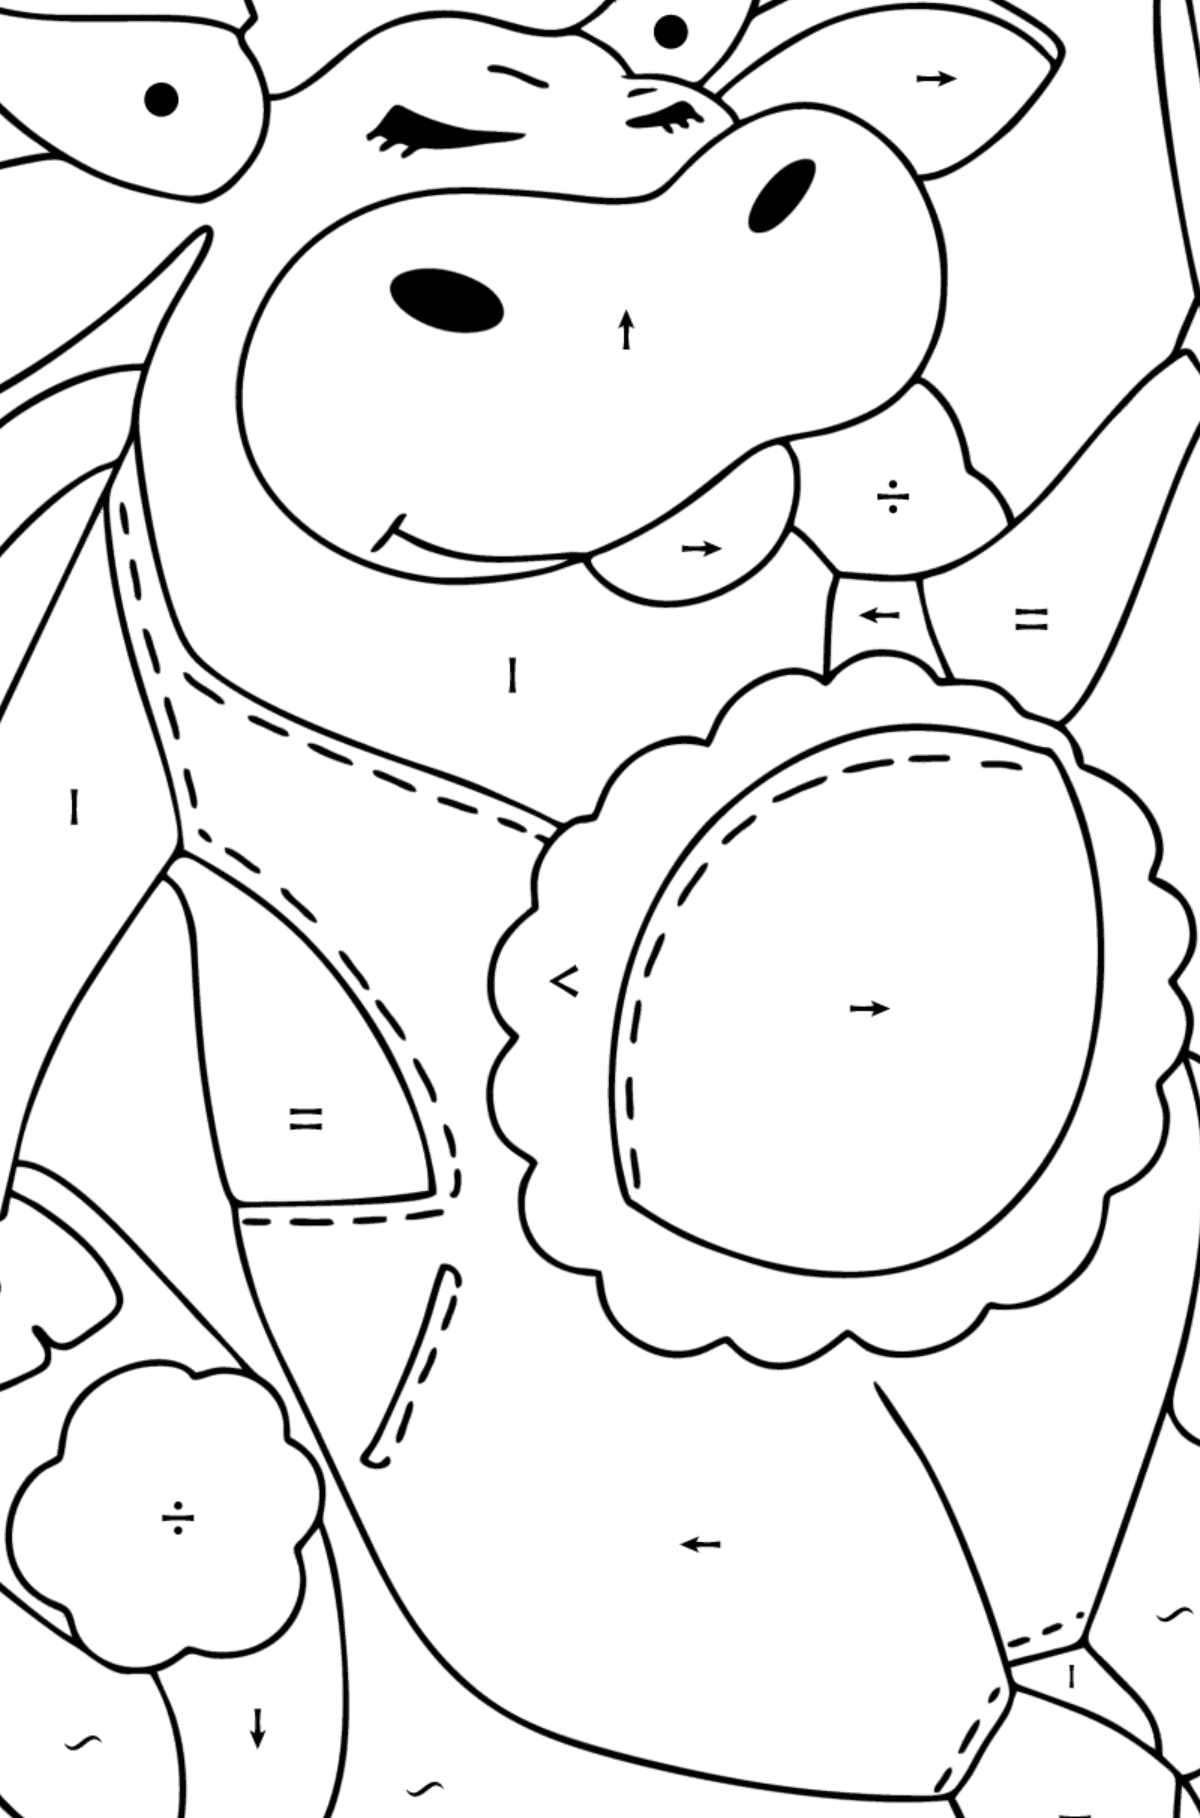 Funny cow coloring page - Coloring by Symbols for Kids